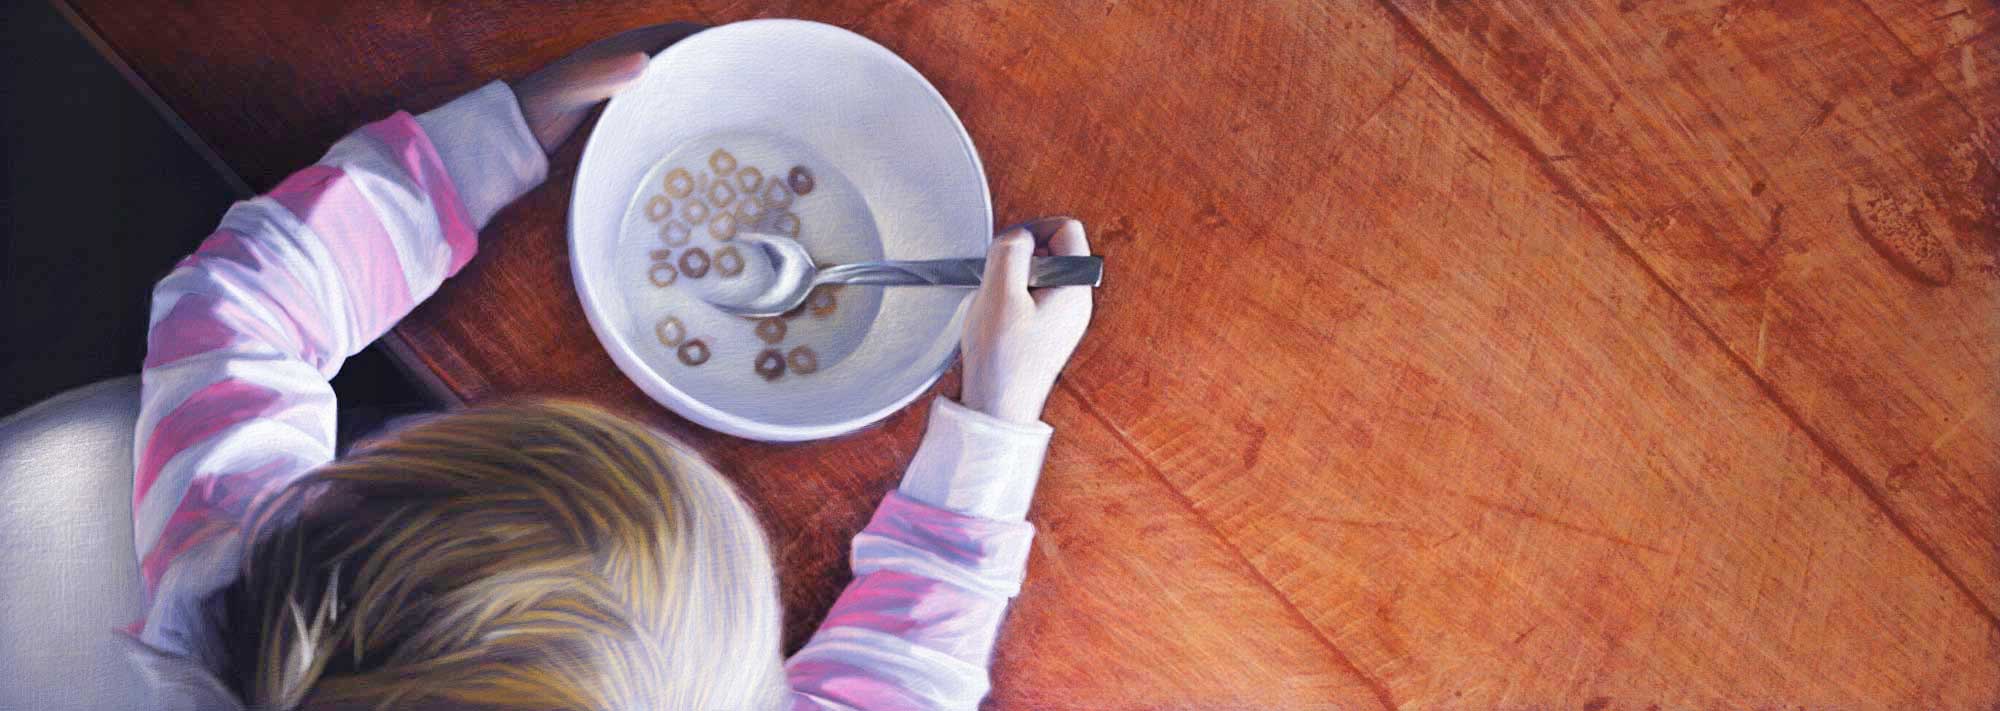 Child Eating Cereal